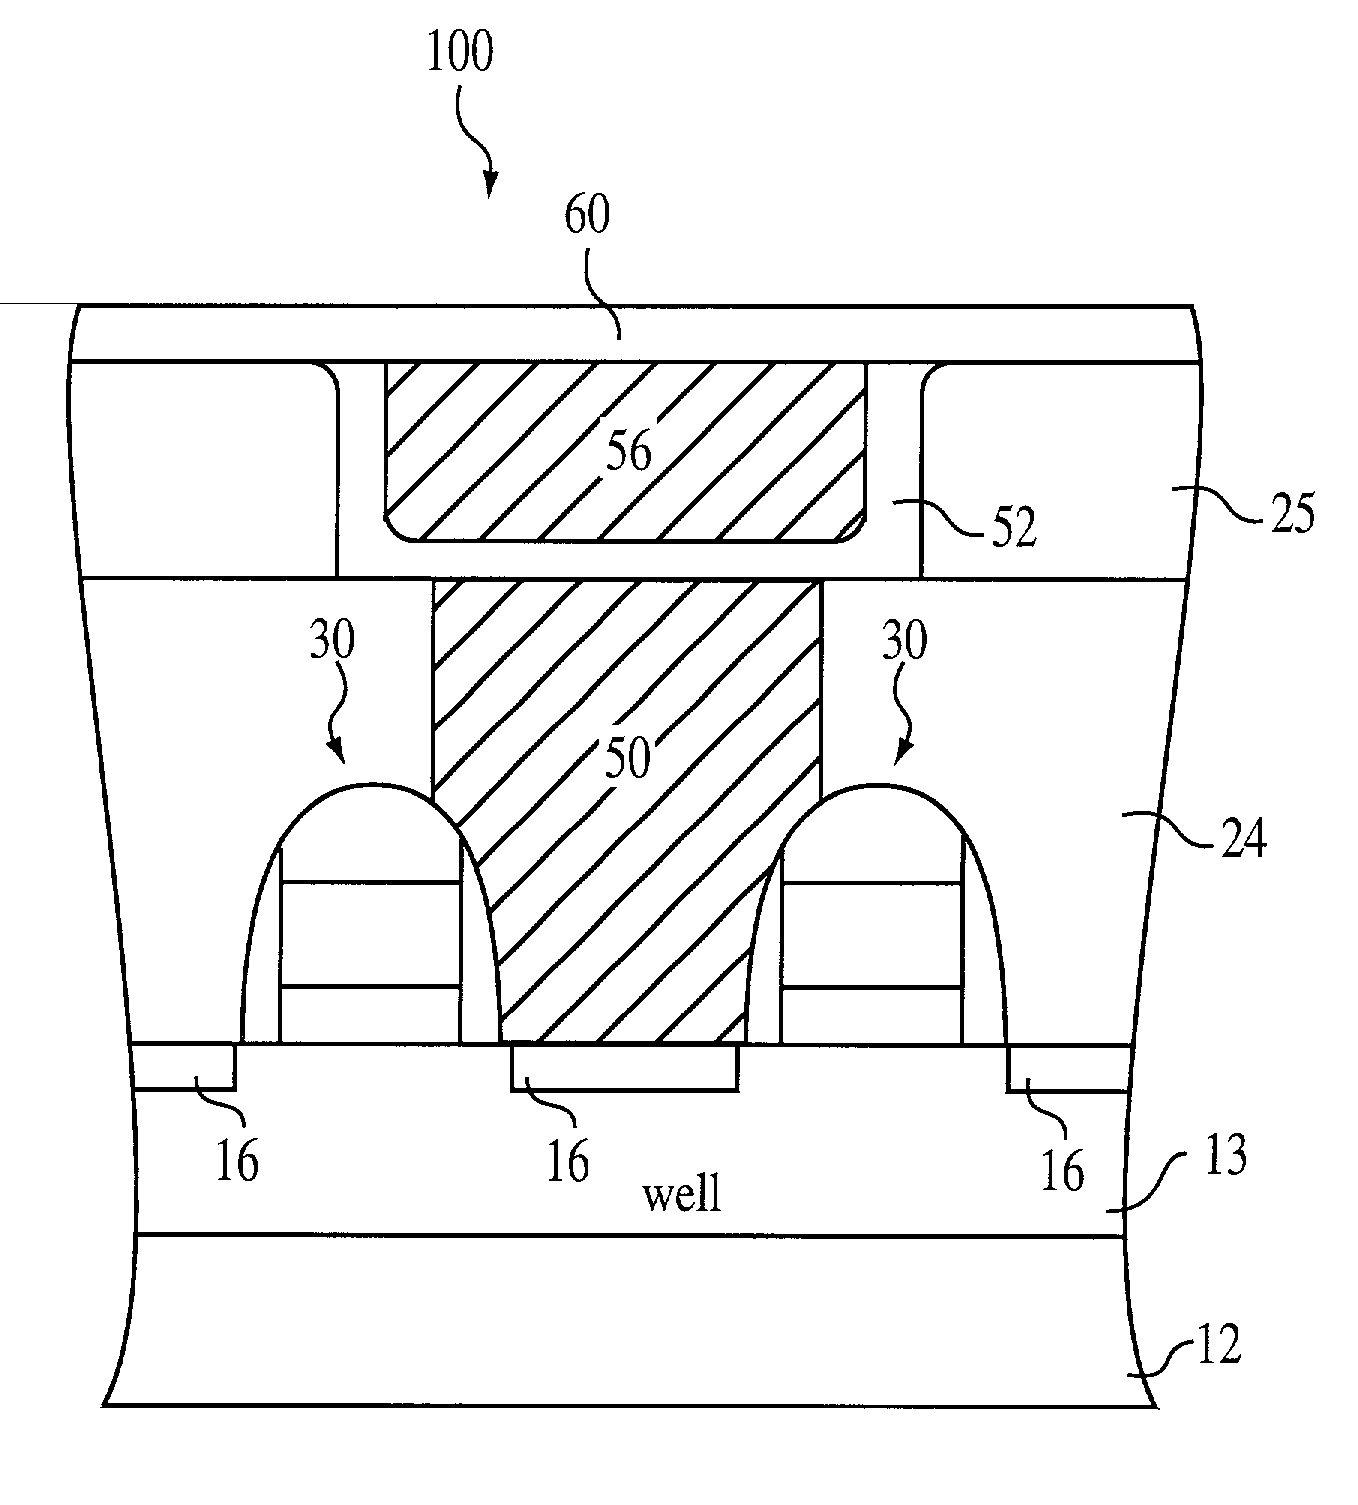 Method of forming an interconnect structure for a semiconductor device